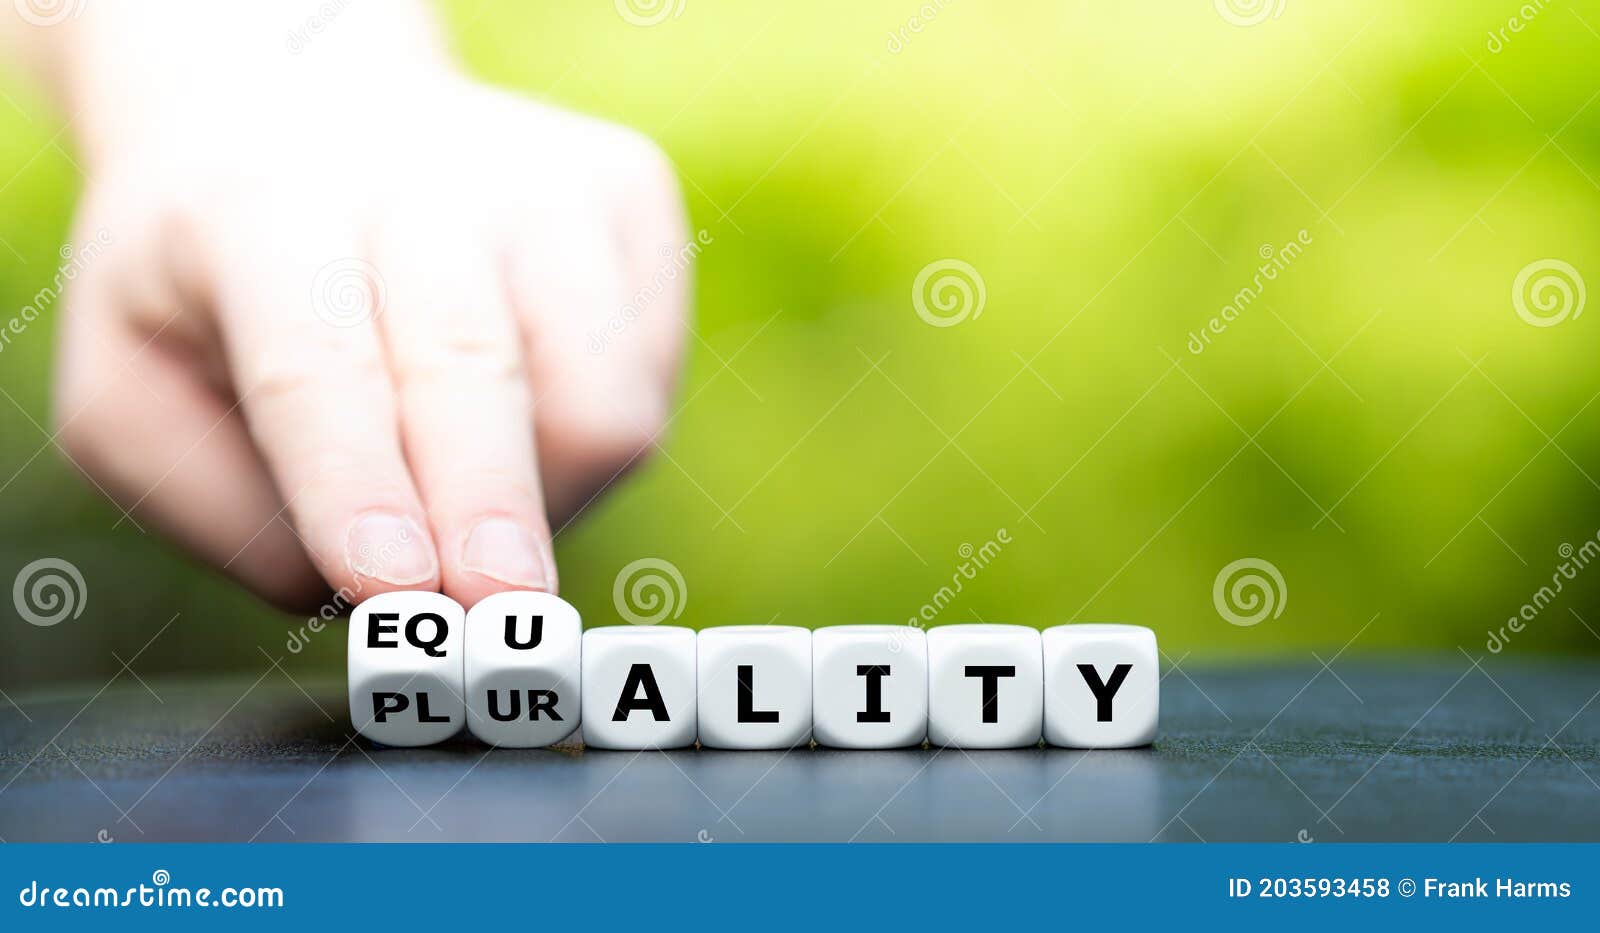 dice form the words plurality and equality.